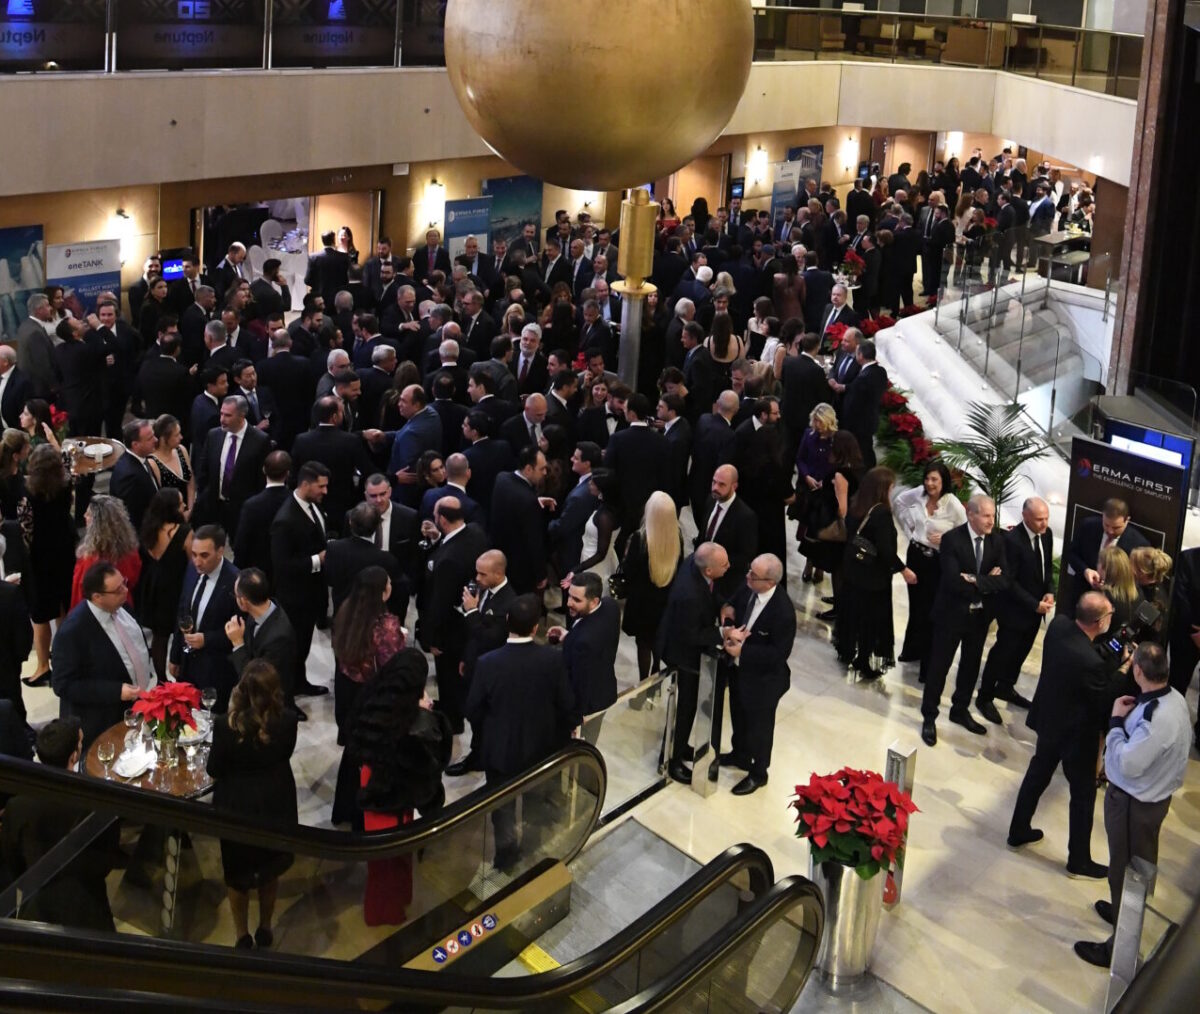 Greek Shipping Awards 2023 guests at the Welcome Drinks Reception, sponsored by Erma First